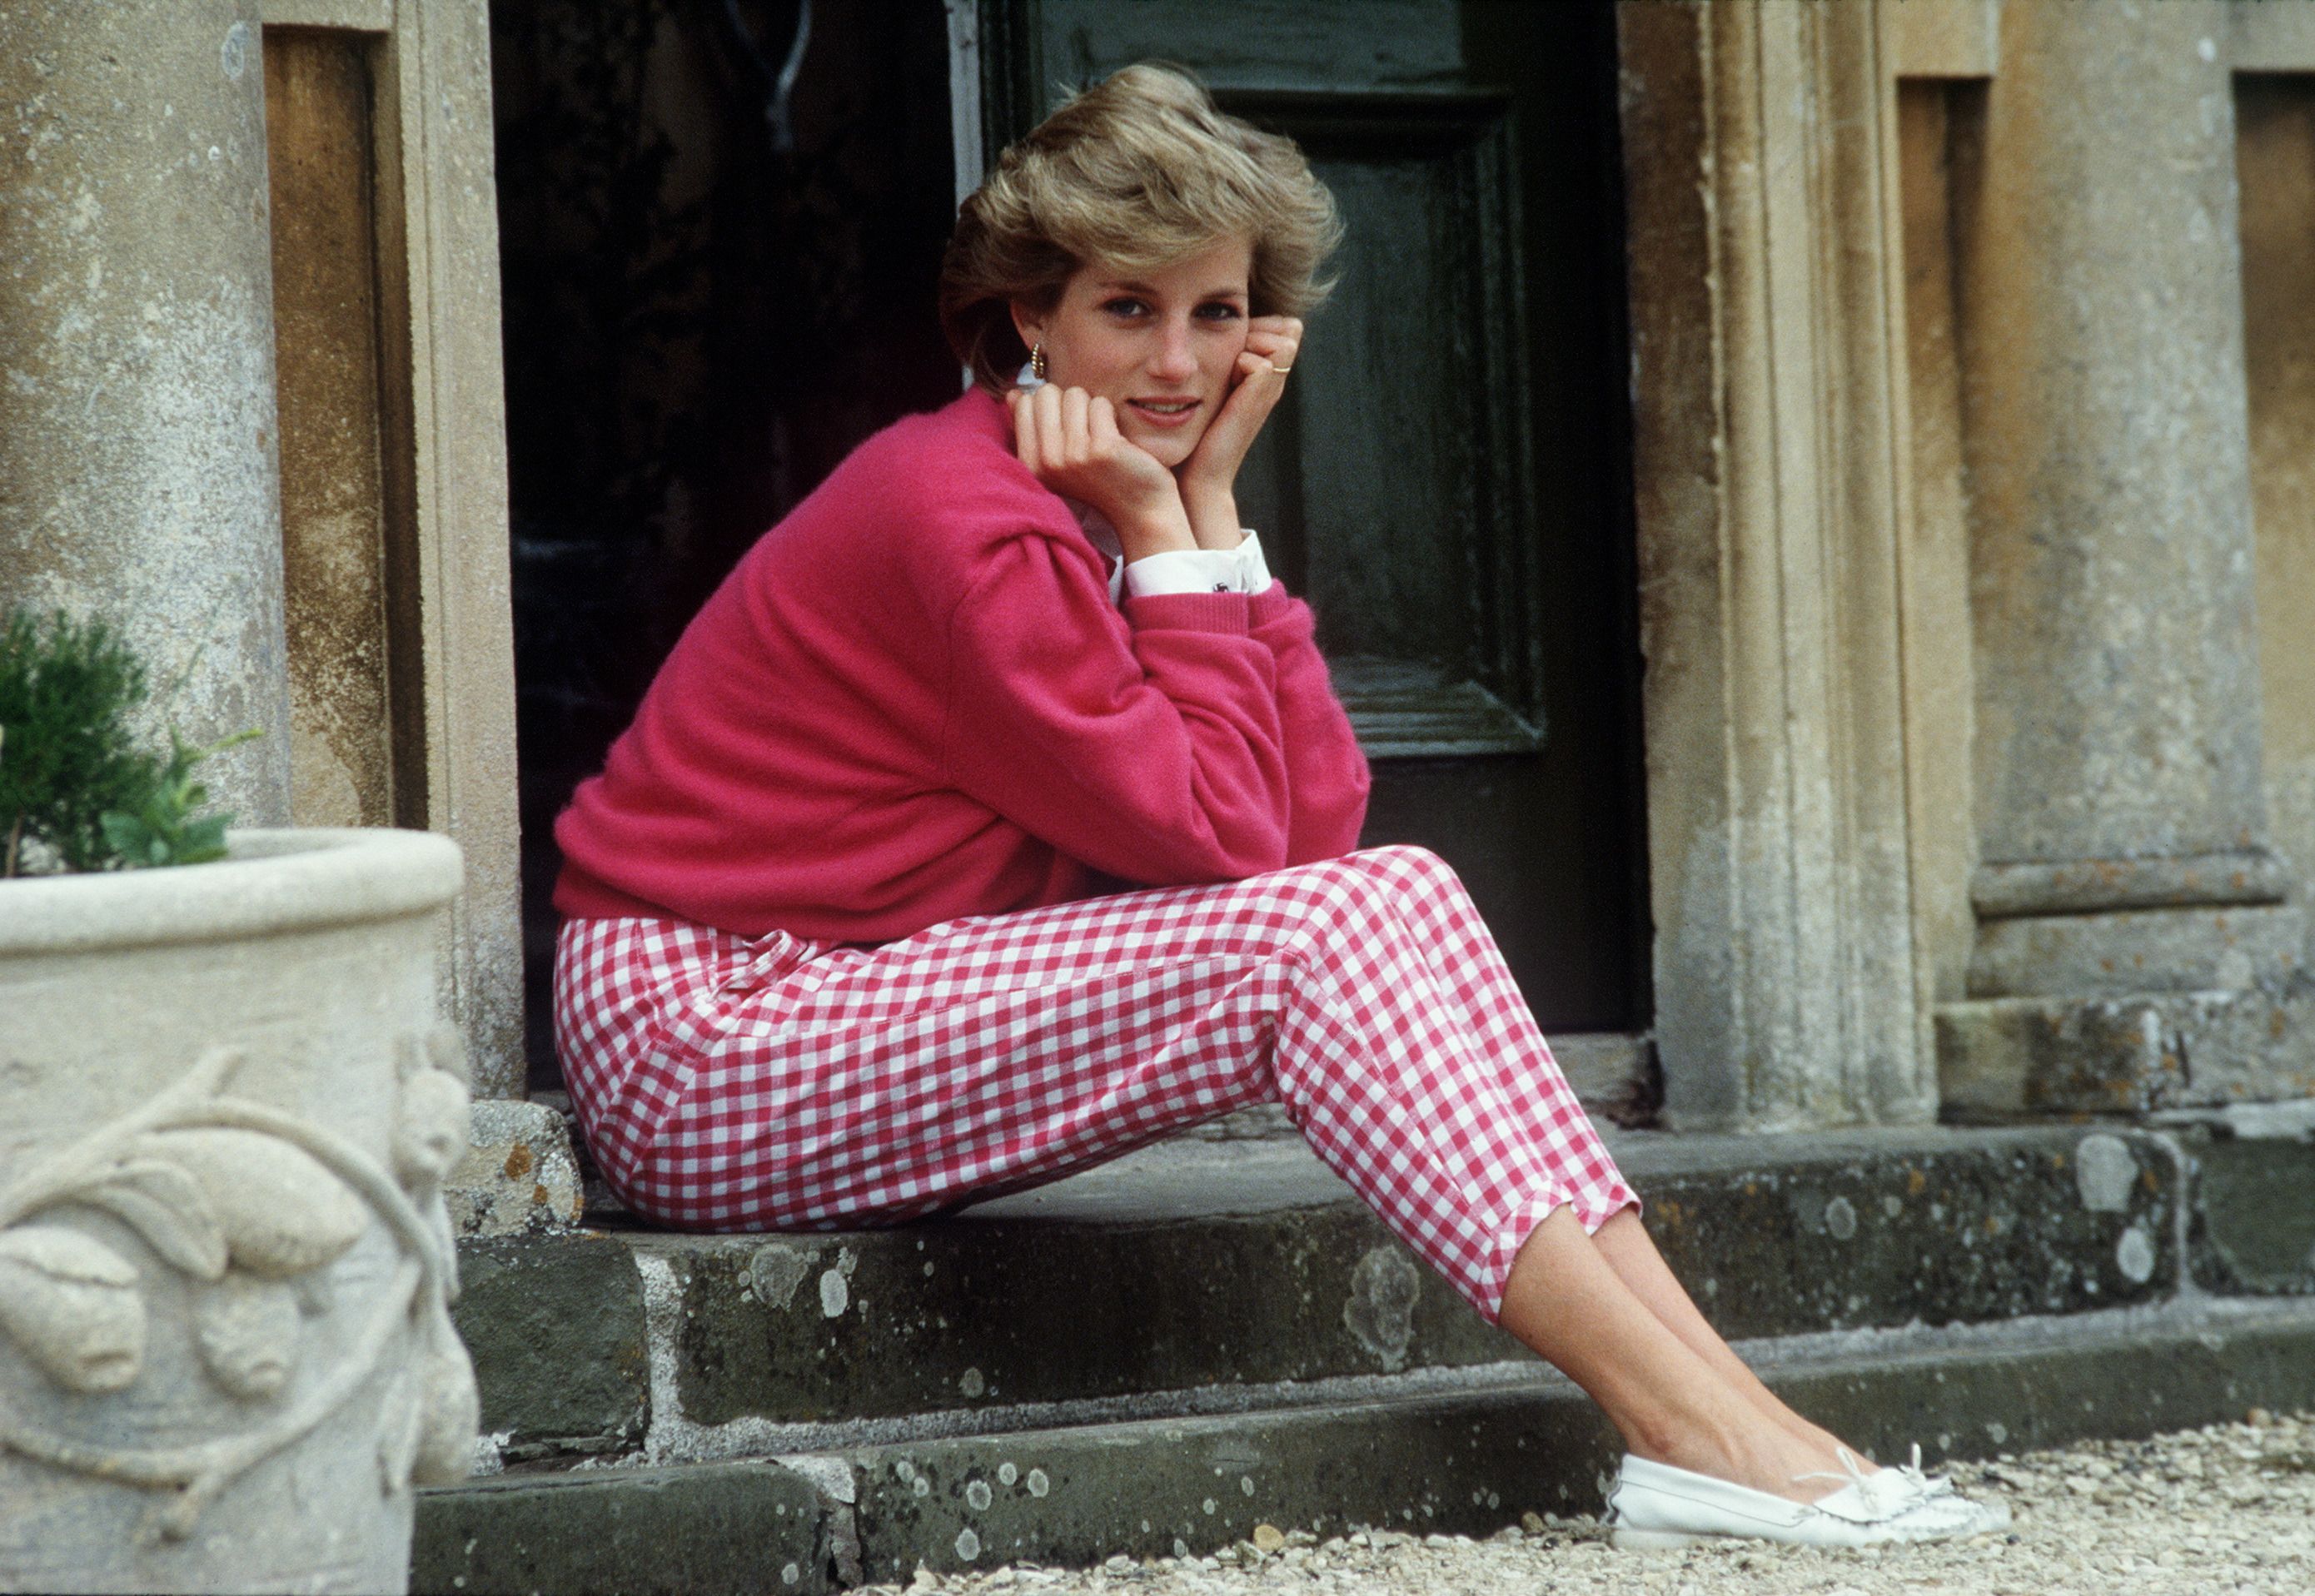 How to Watch HBO's "The Princess" Diana Documentary